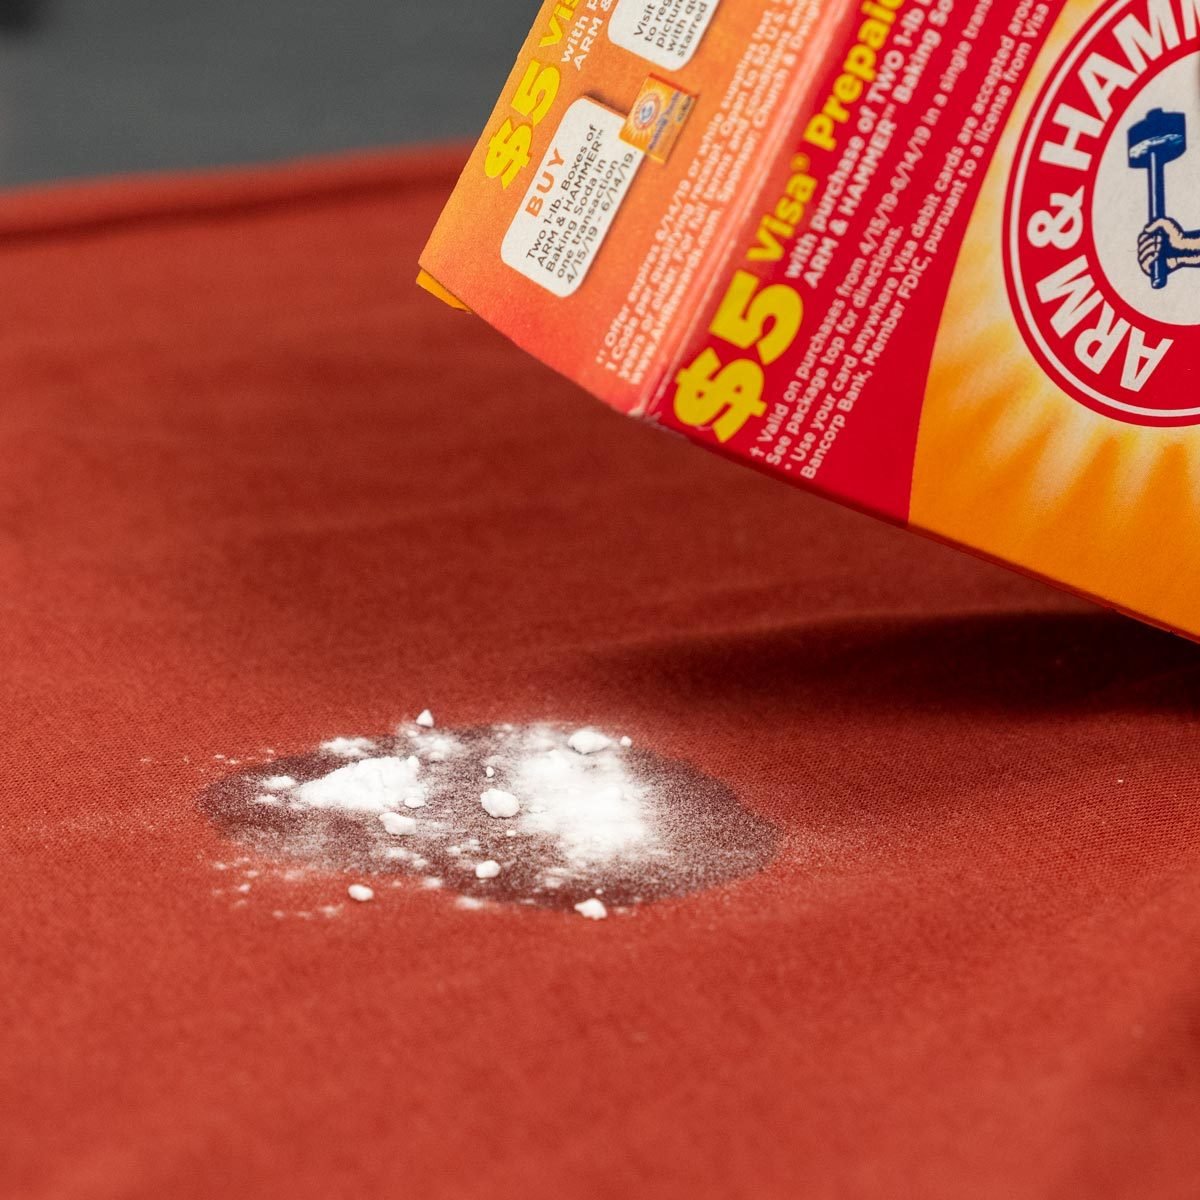 15 things you can clean with baking soda